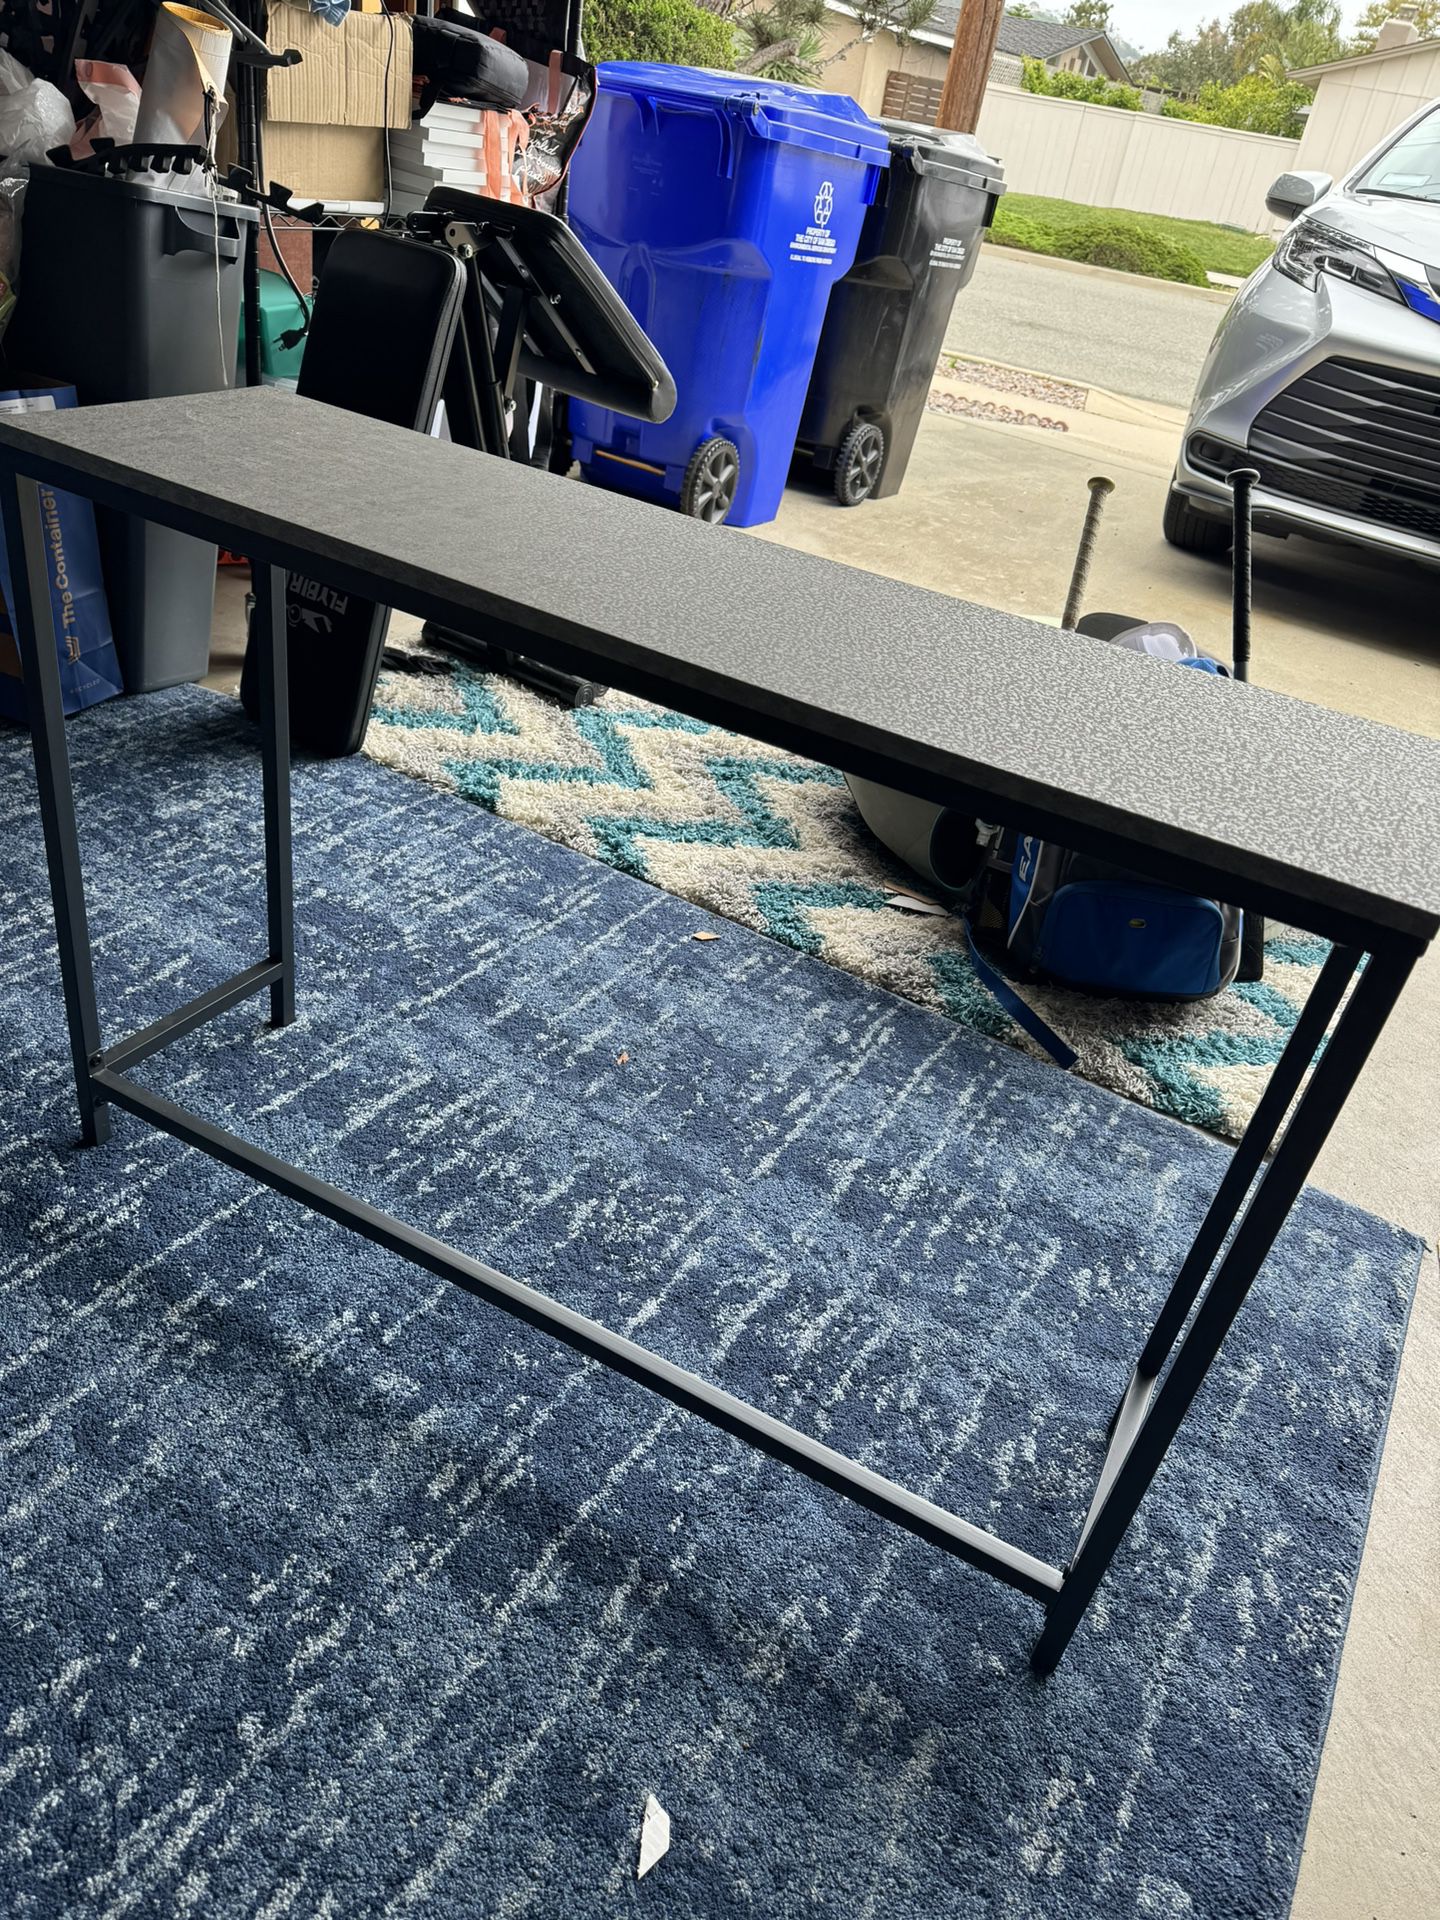 Modern Entryway Console Table